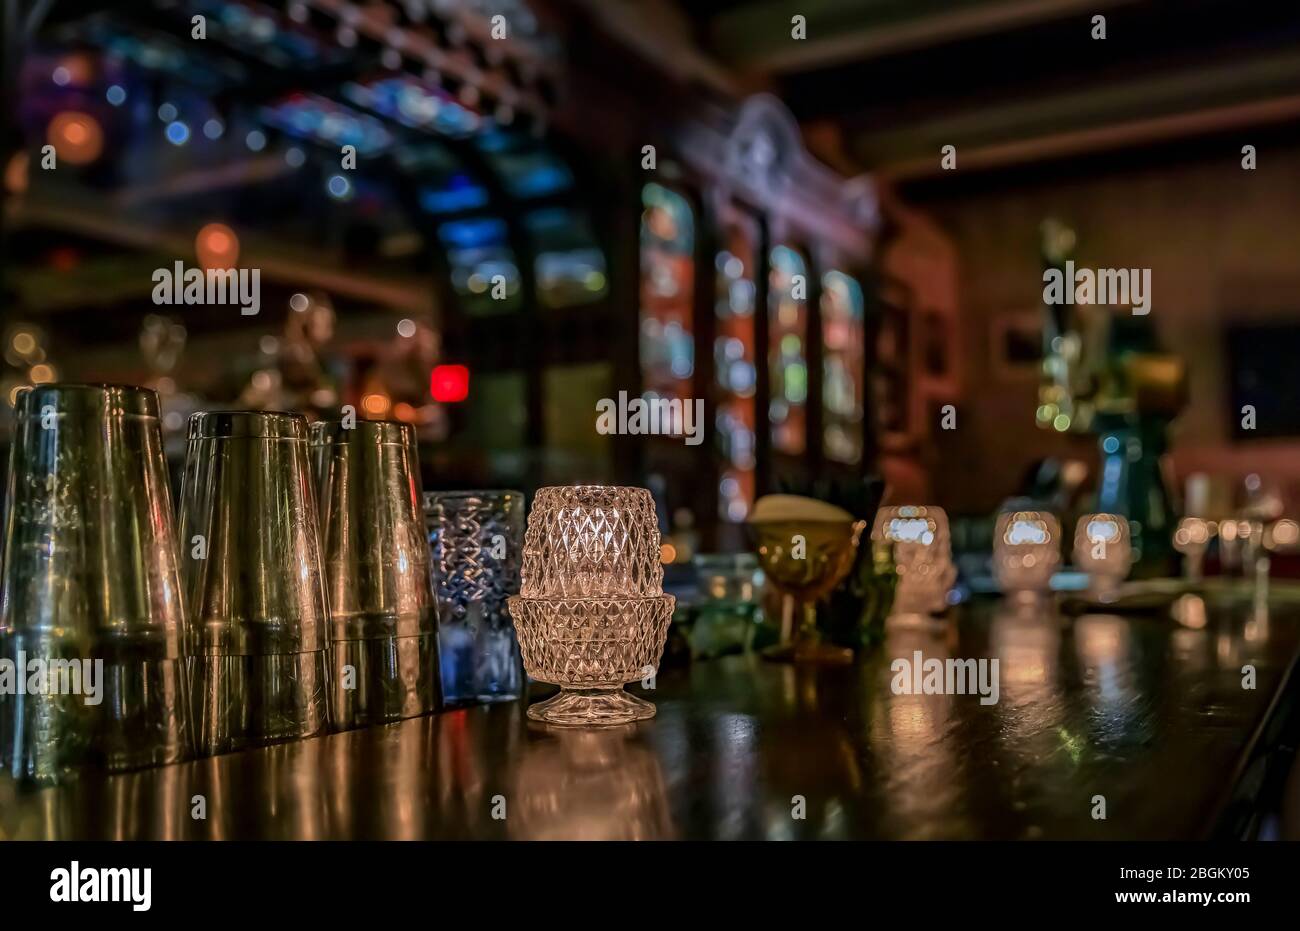 Vintage wooden bar counter with candles in glass holders, bar tools and a blurred view of a baroque or Victorian bar with bottles in the background Stock Photo